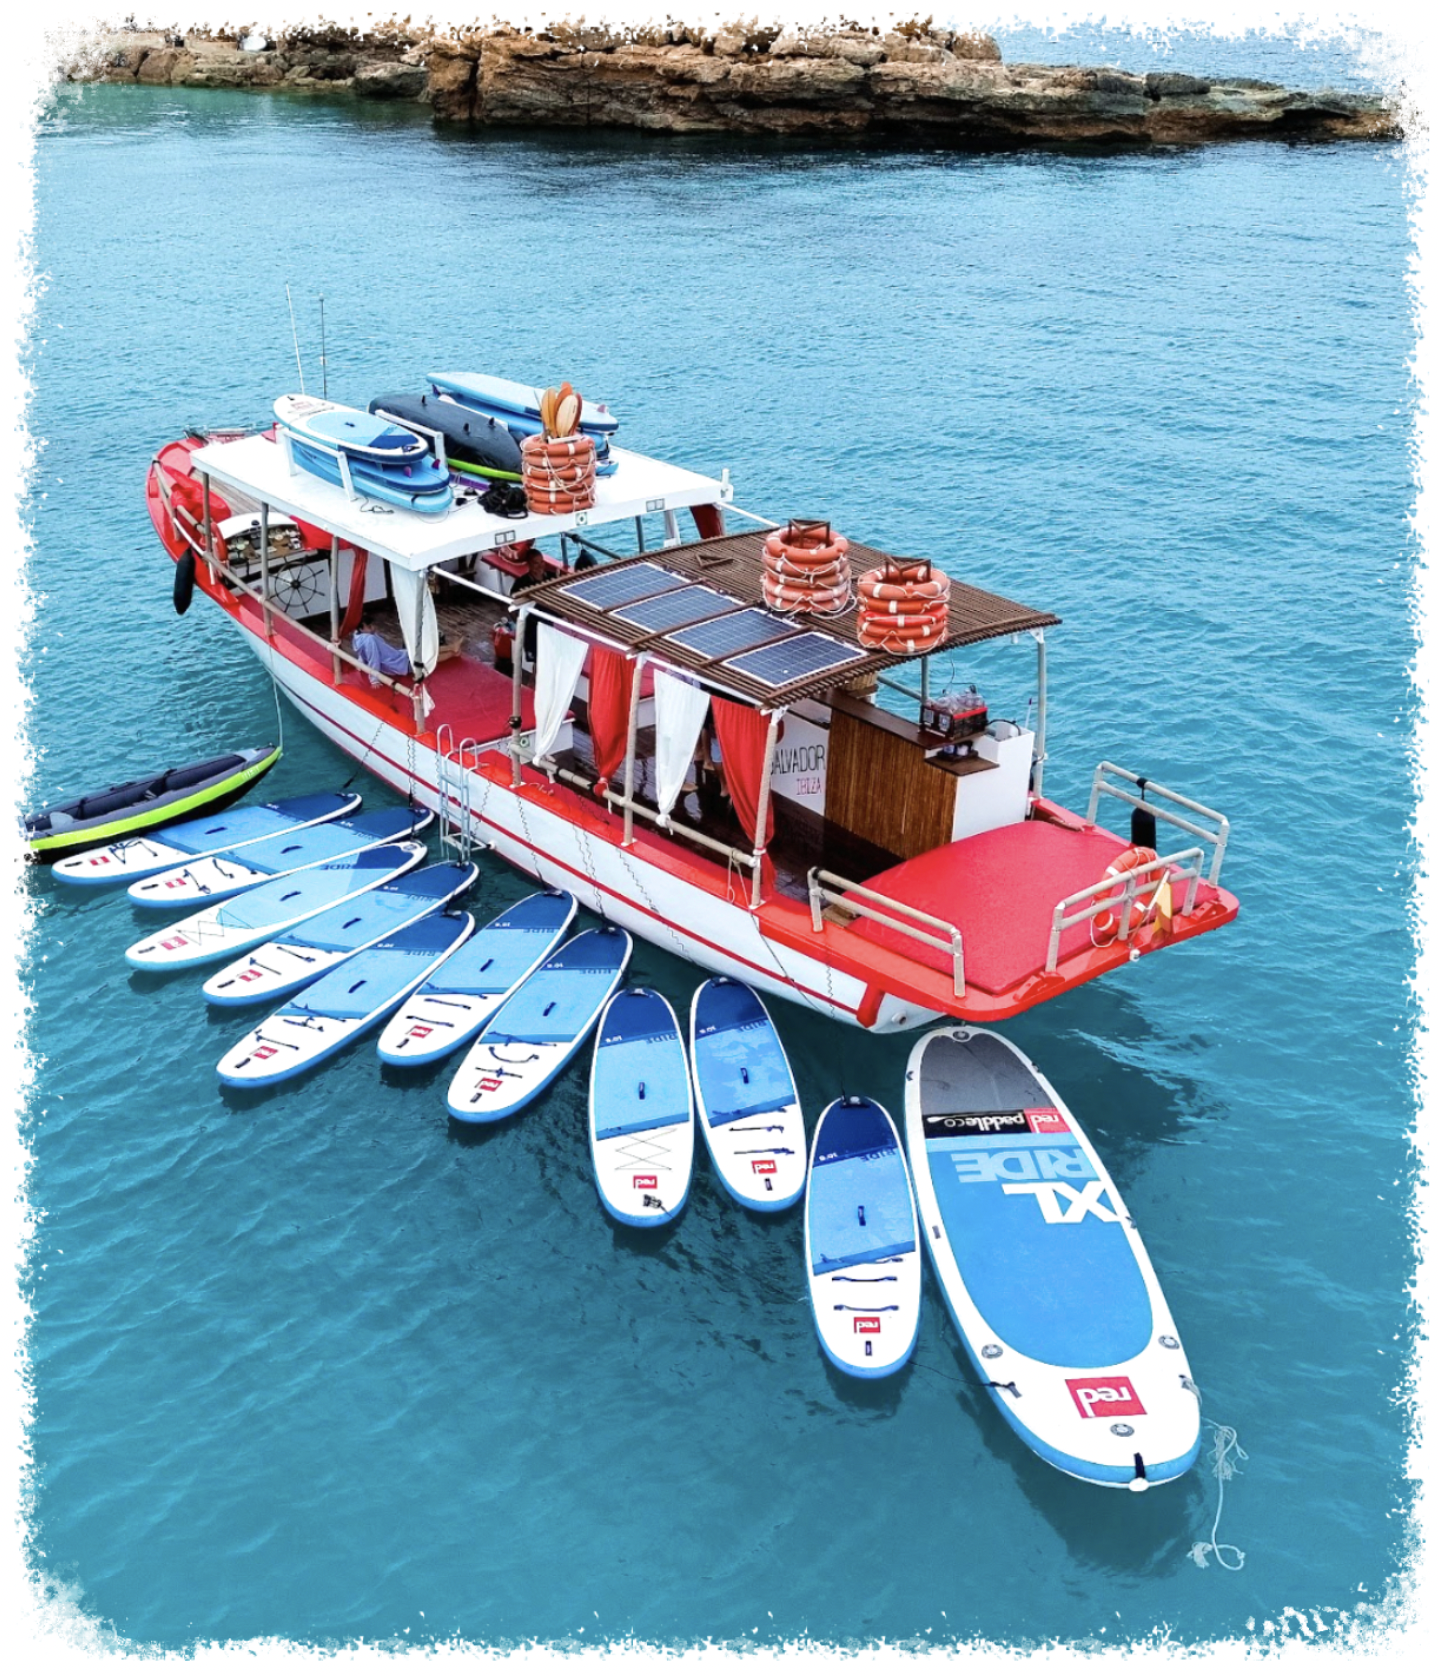 3-HOURS ALL-INCLUSIVE BOAT TRIP